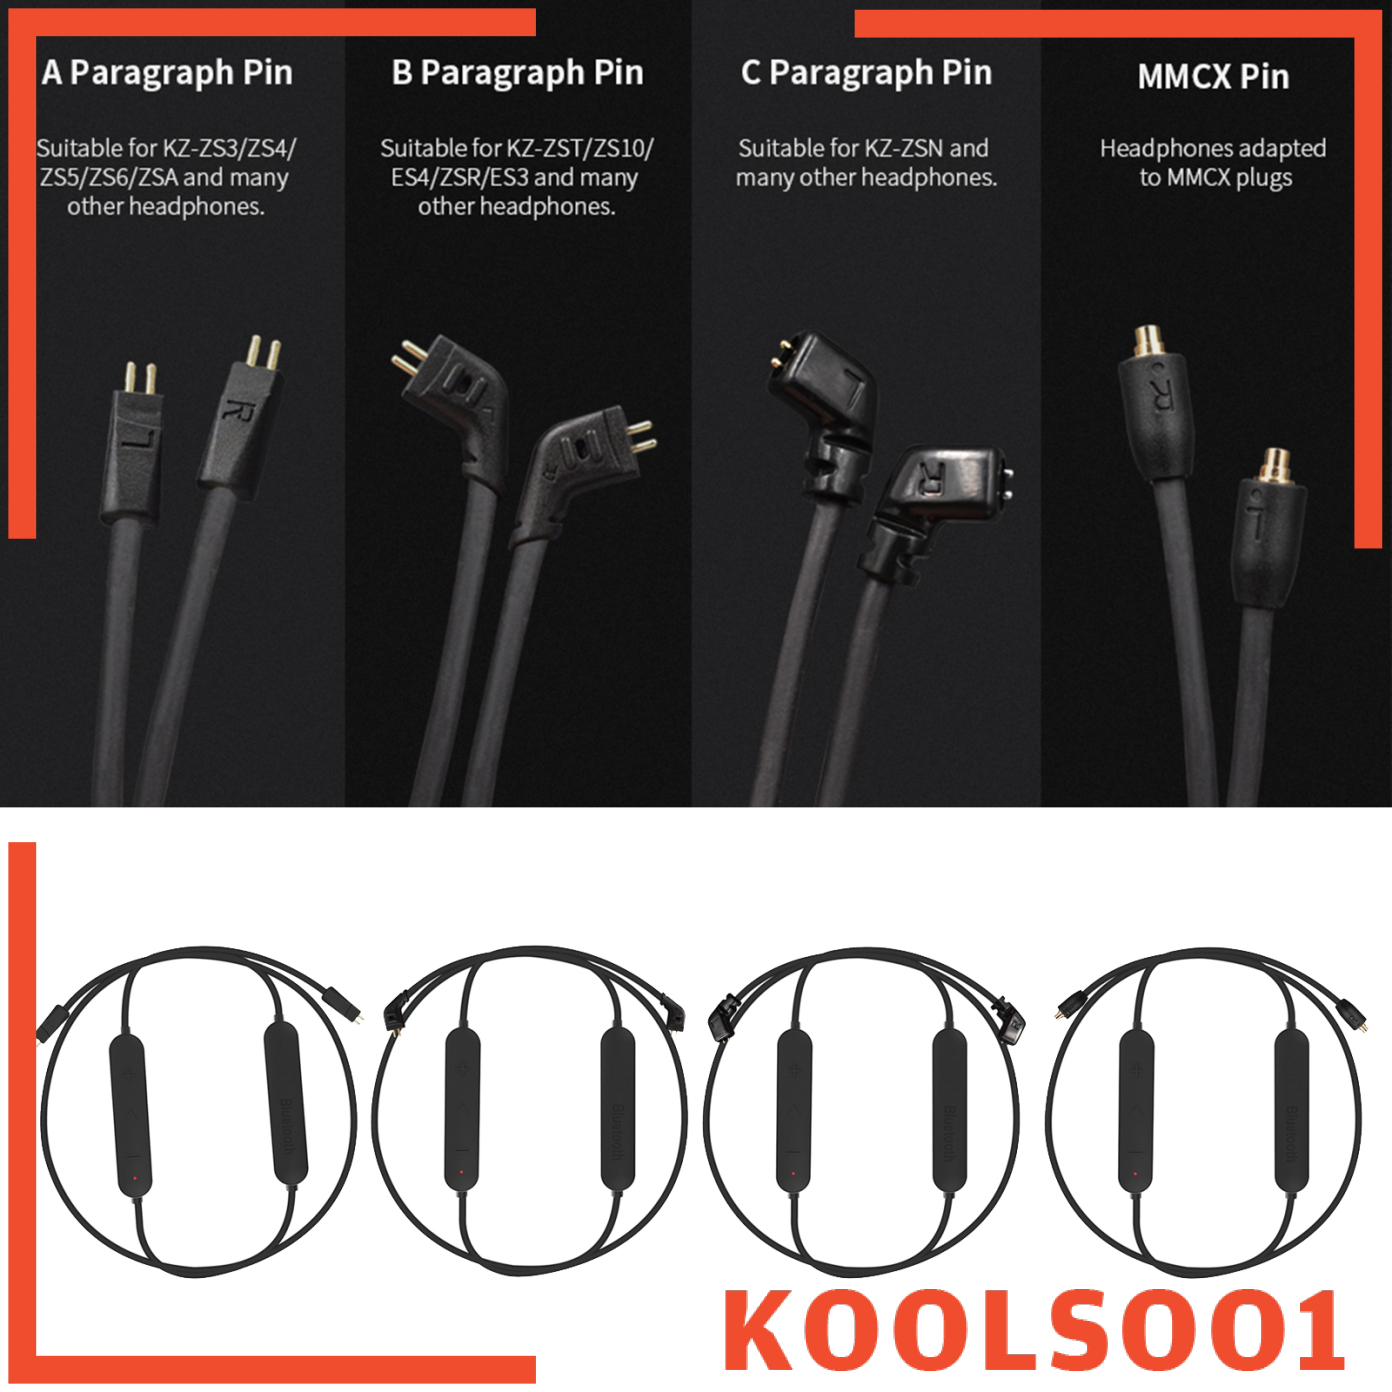 [KOOLSOO1]Bluetooth Module Wireless Upgrade Cable Replacement for KZ Earphones, HD Transmission